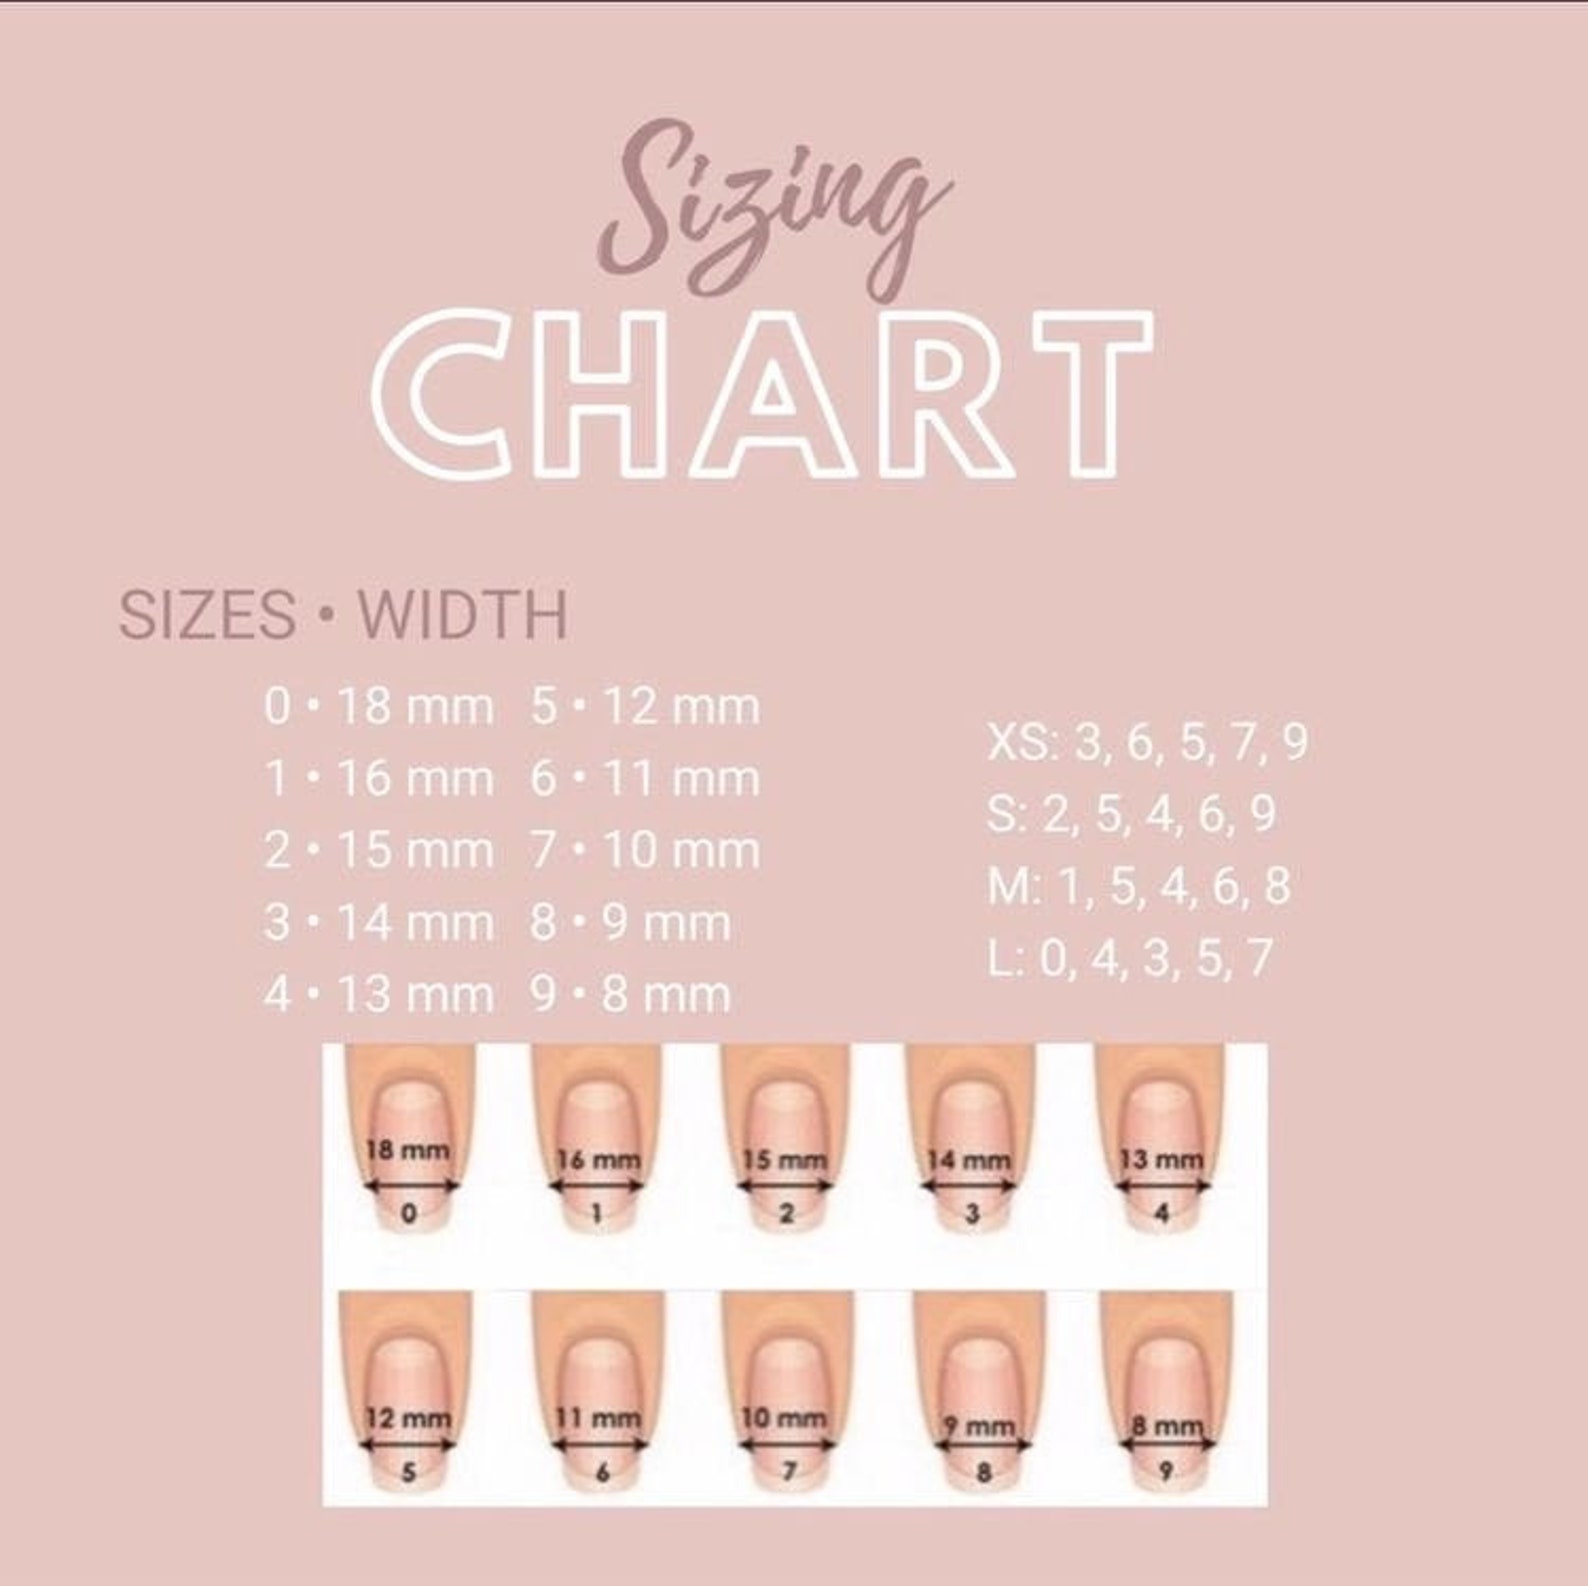 Standard Sizing Guide For Press Ons | Etsy